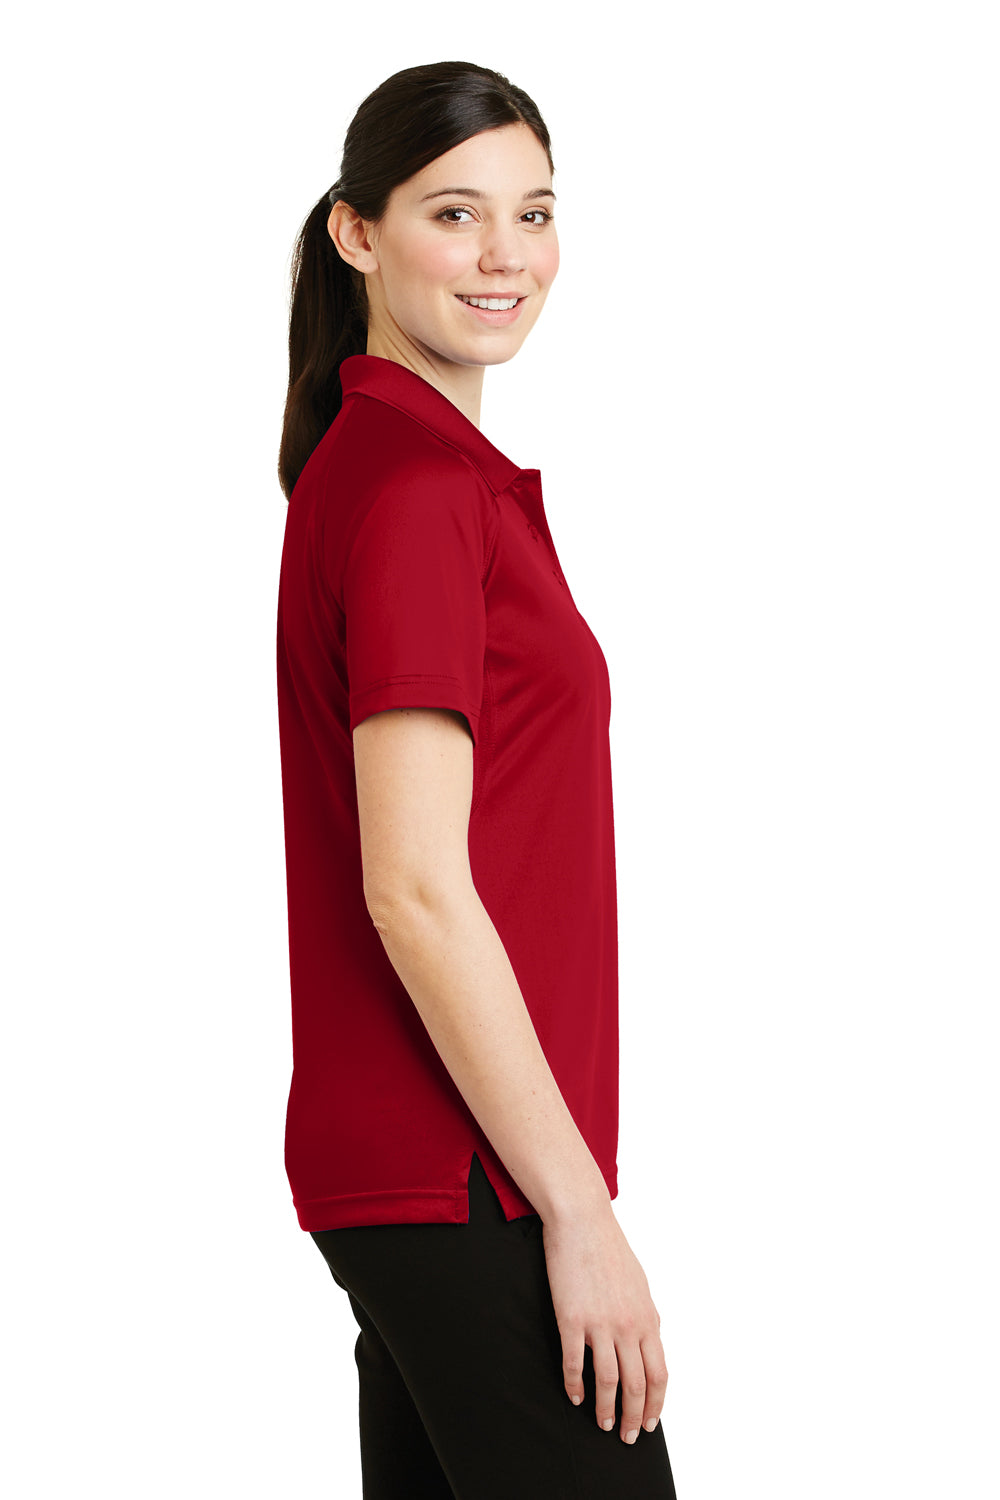 CornerStone CS411 Womens Select Tactical Moisture Wicking Short Sleeve Polo Shirt Red Side